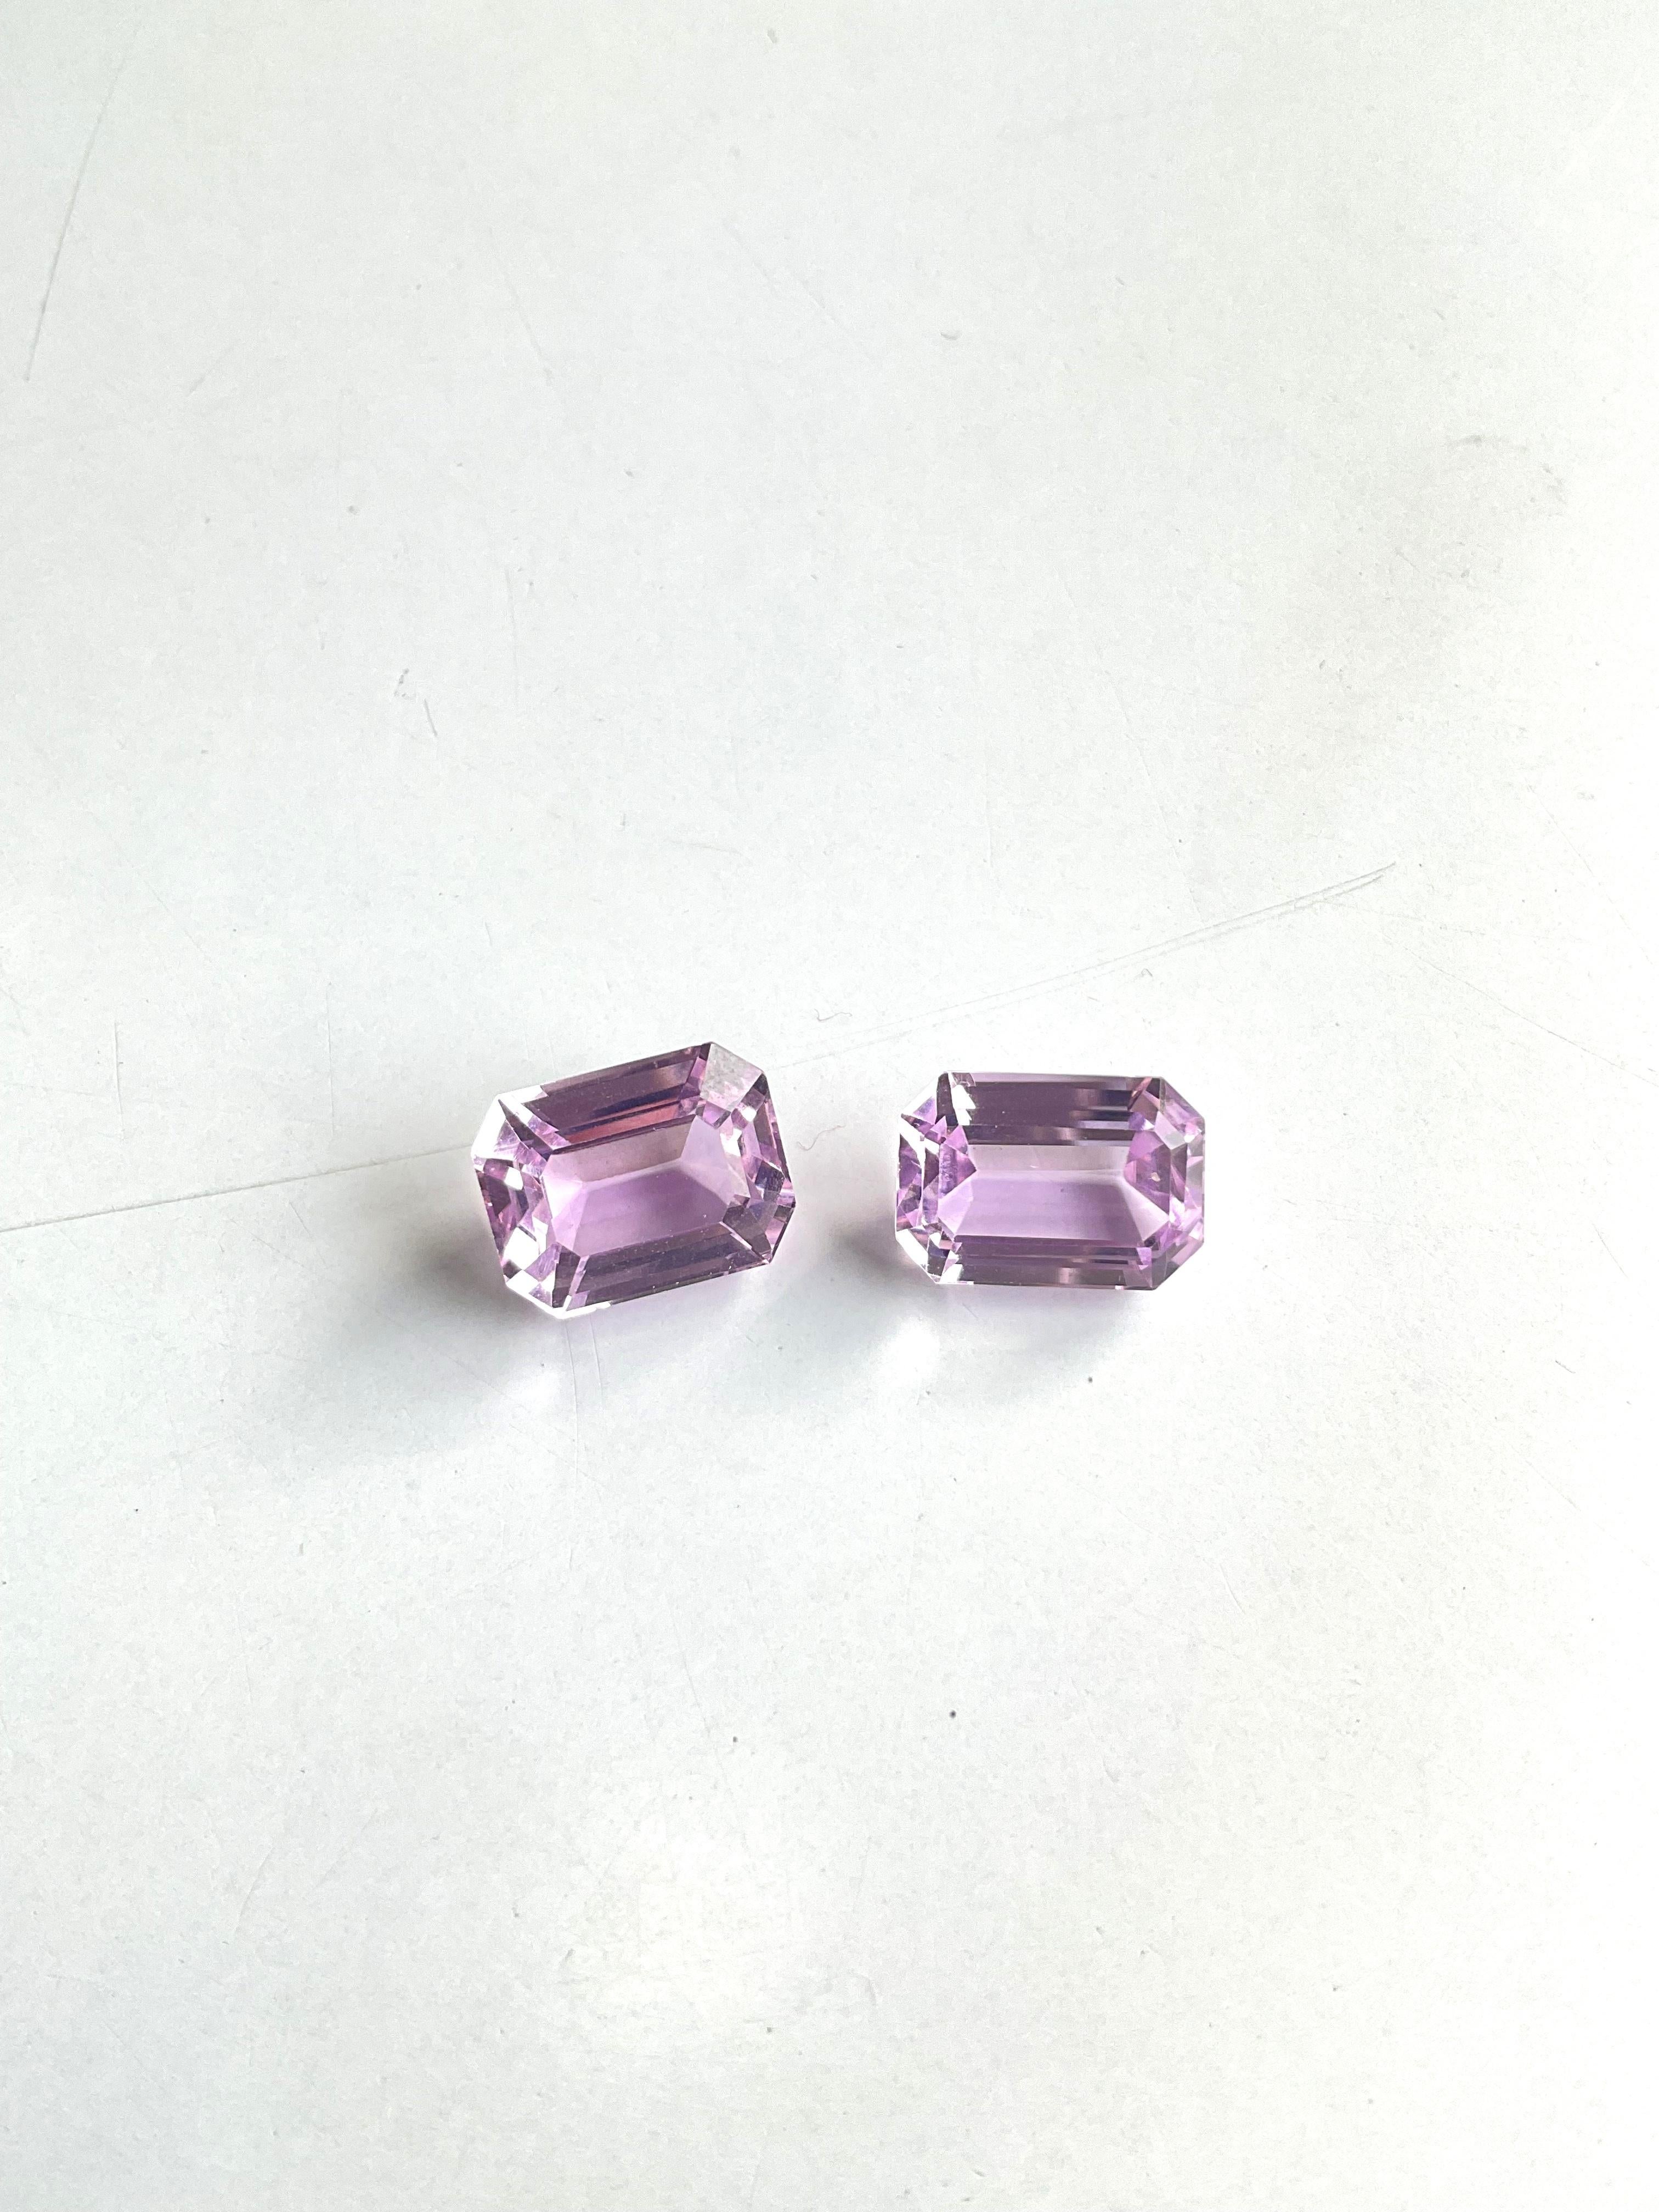 18.64 Carats Pink Kunzite Octagon Natural Cut Stones For Fine Gem Jewellery For Sale 1